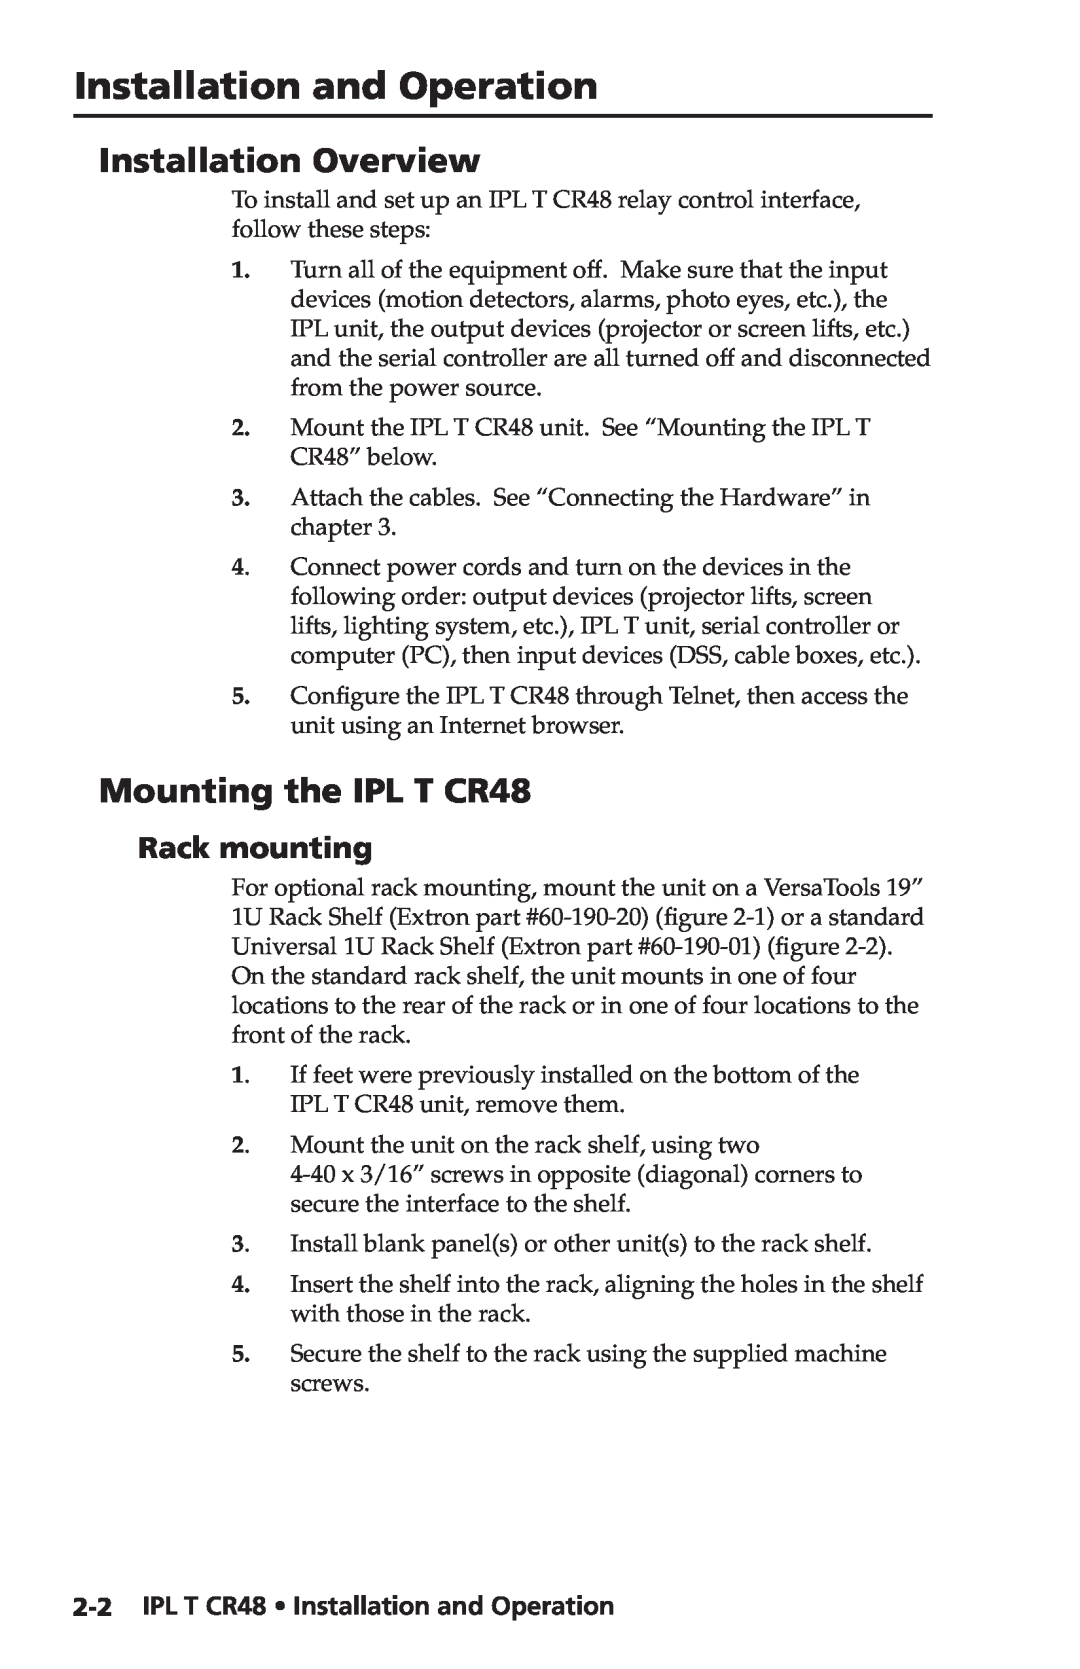 Extron electronic manual Installation and Operation, Installation Overview, Mounting the IPL T CR48, Rack mounting 